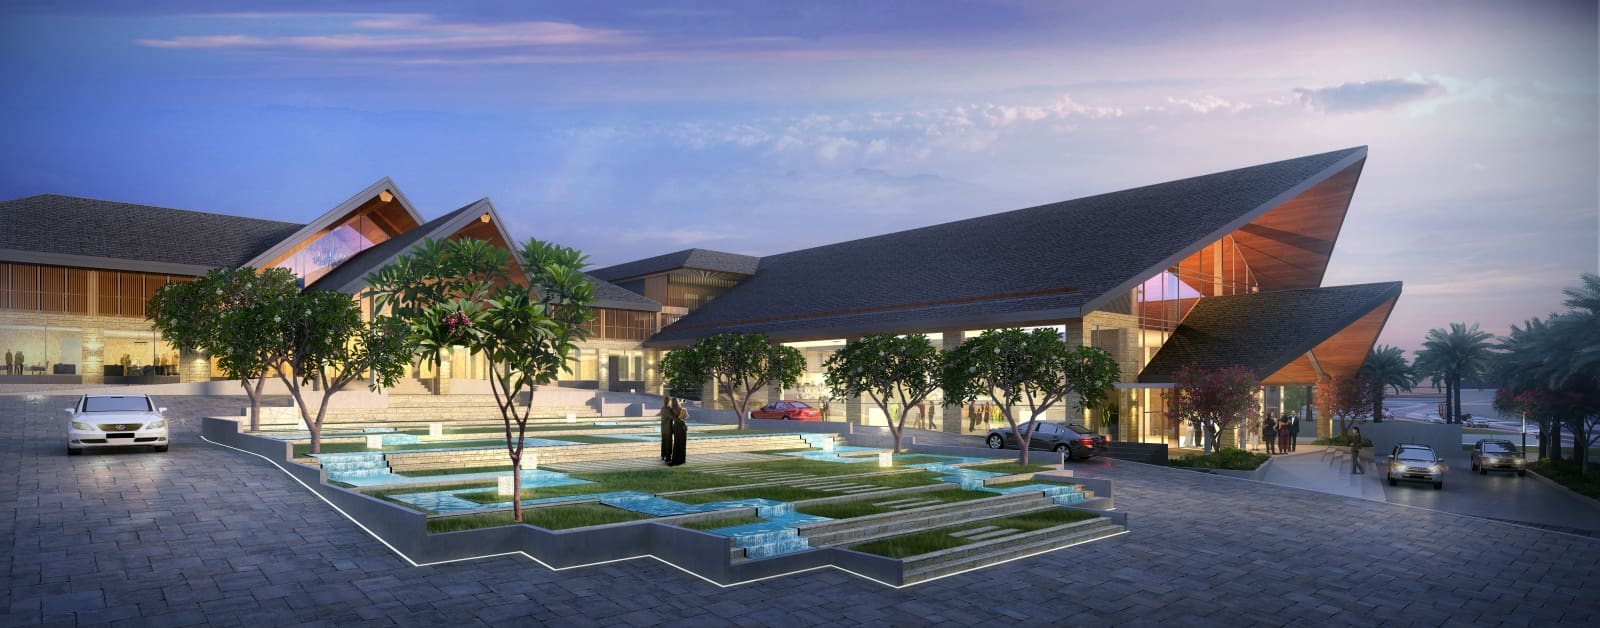 rendered image of full exterior from the front of the Marriott in Hoi An